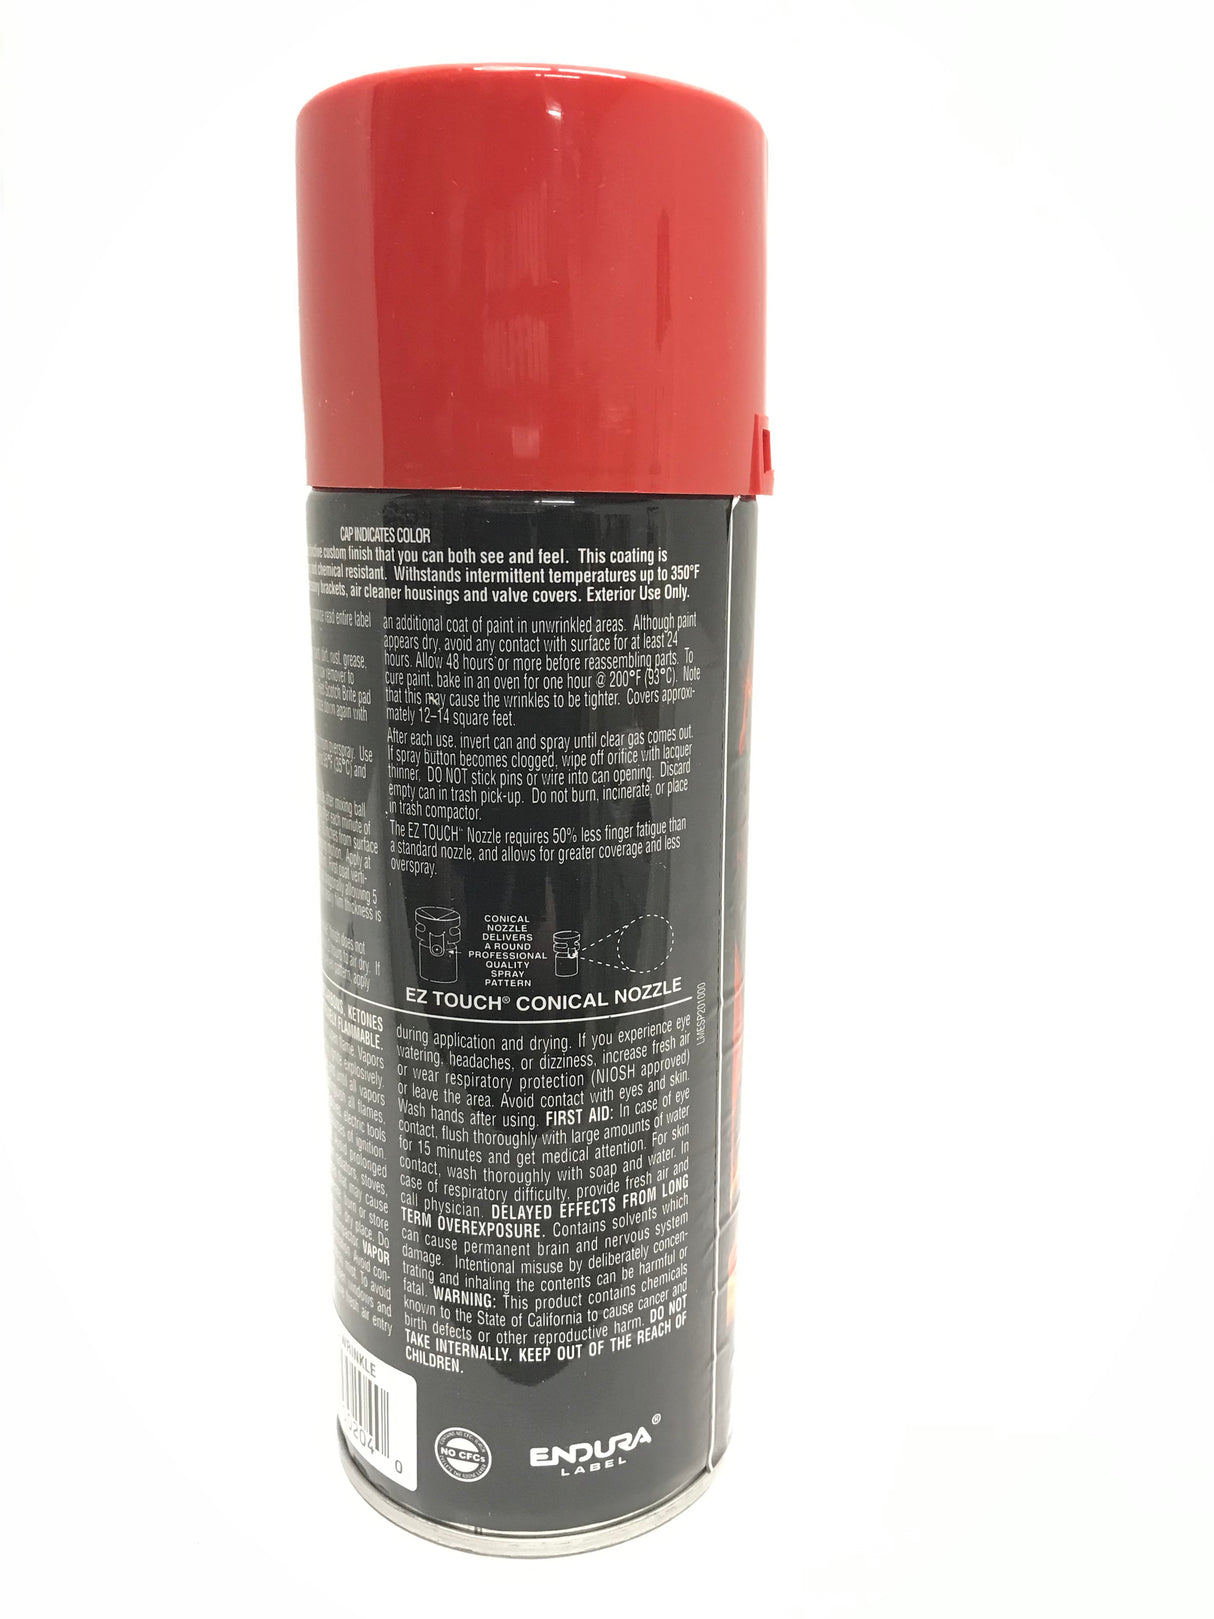 VHT SP204 RED High Temperature Wrinkle Finish Durable Texture Coating - 11 oz